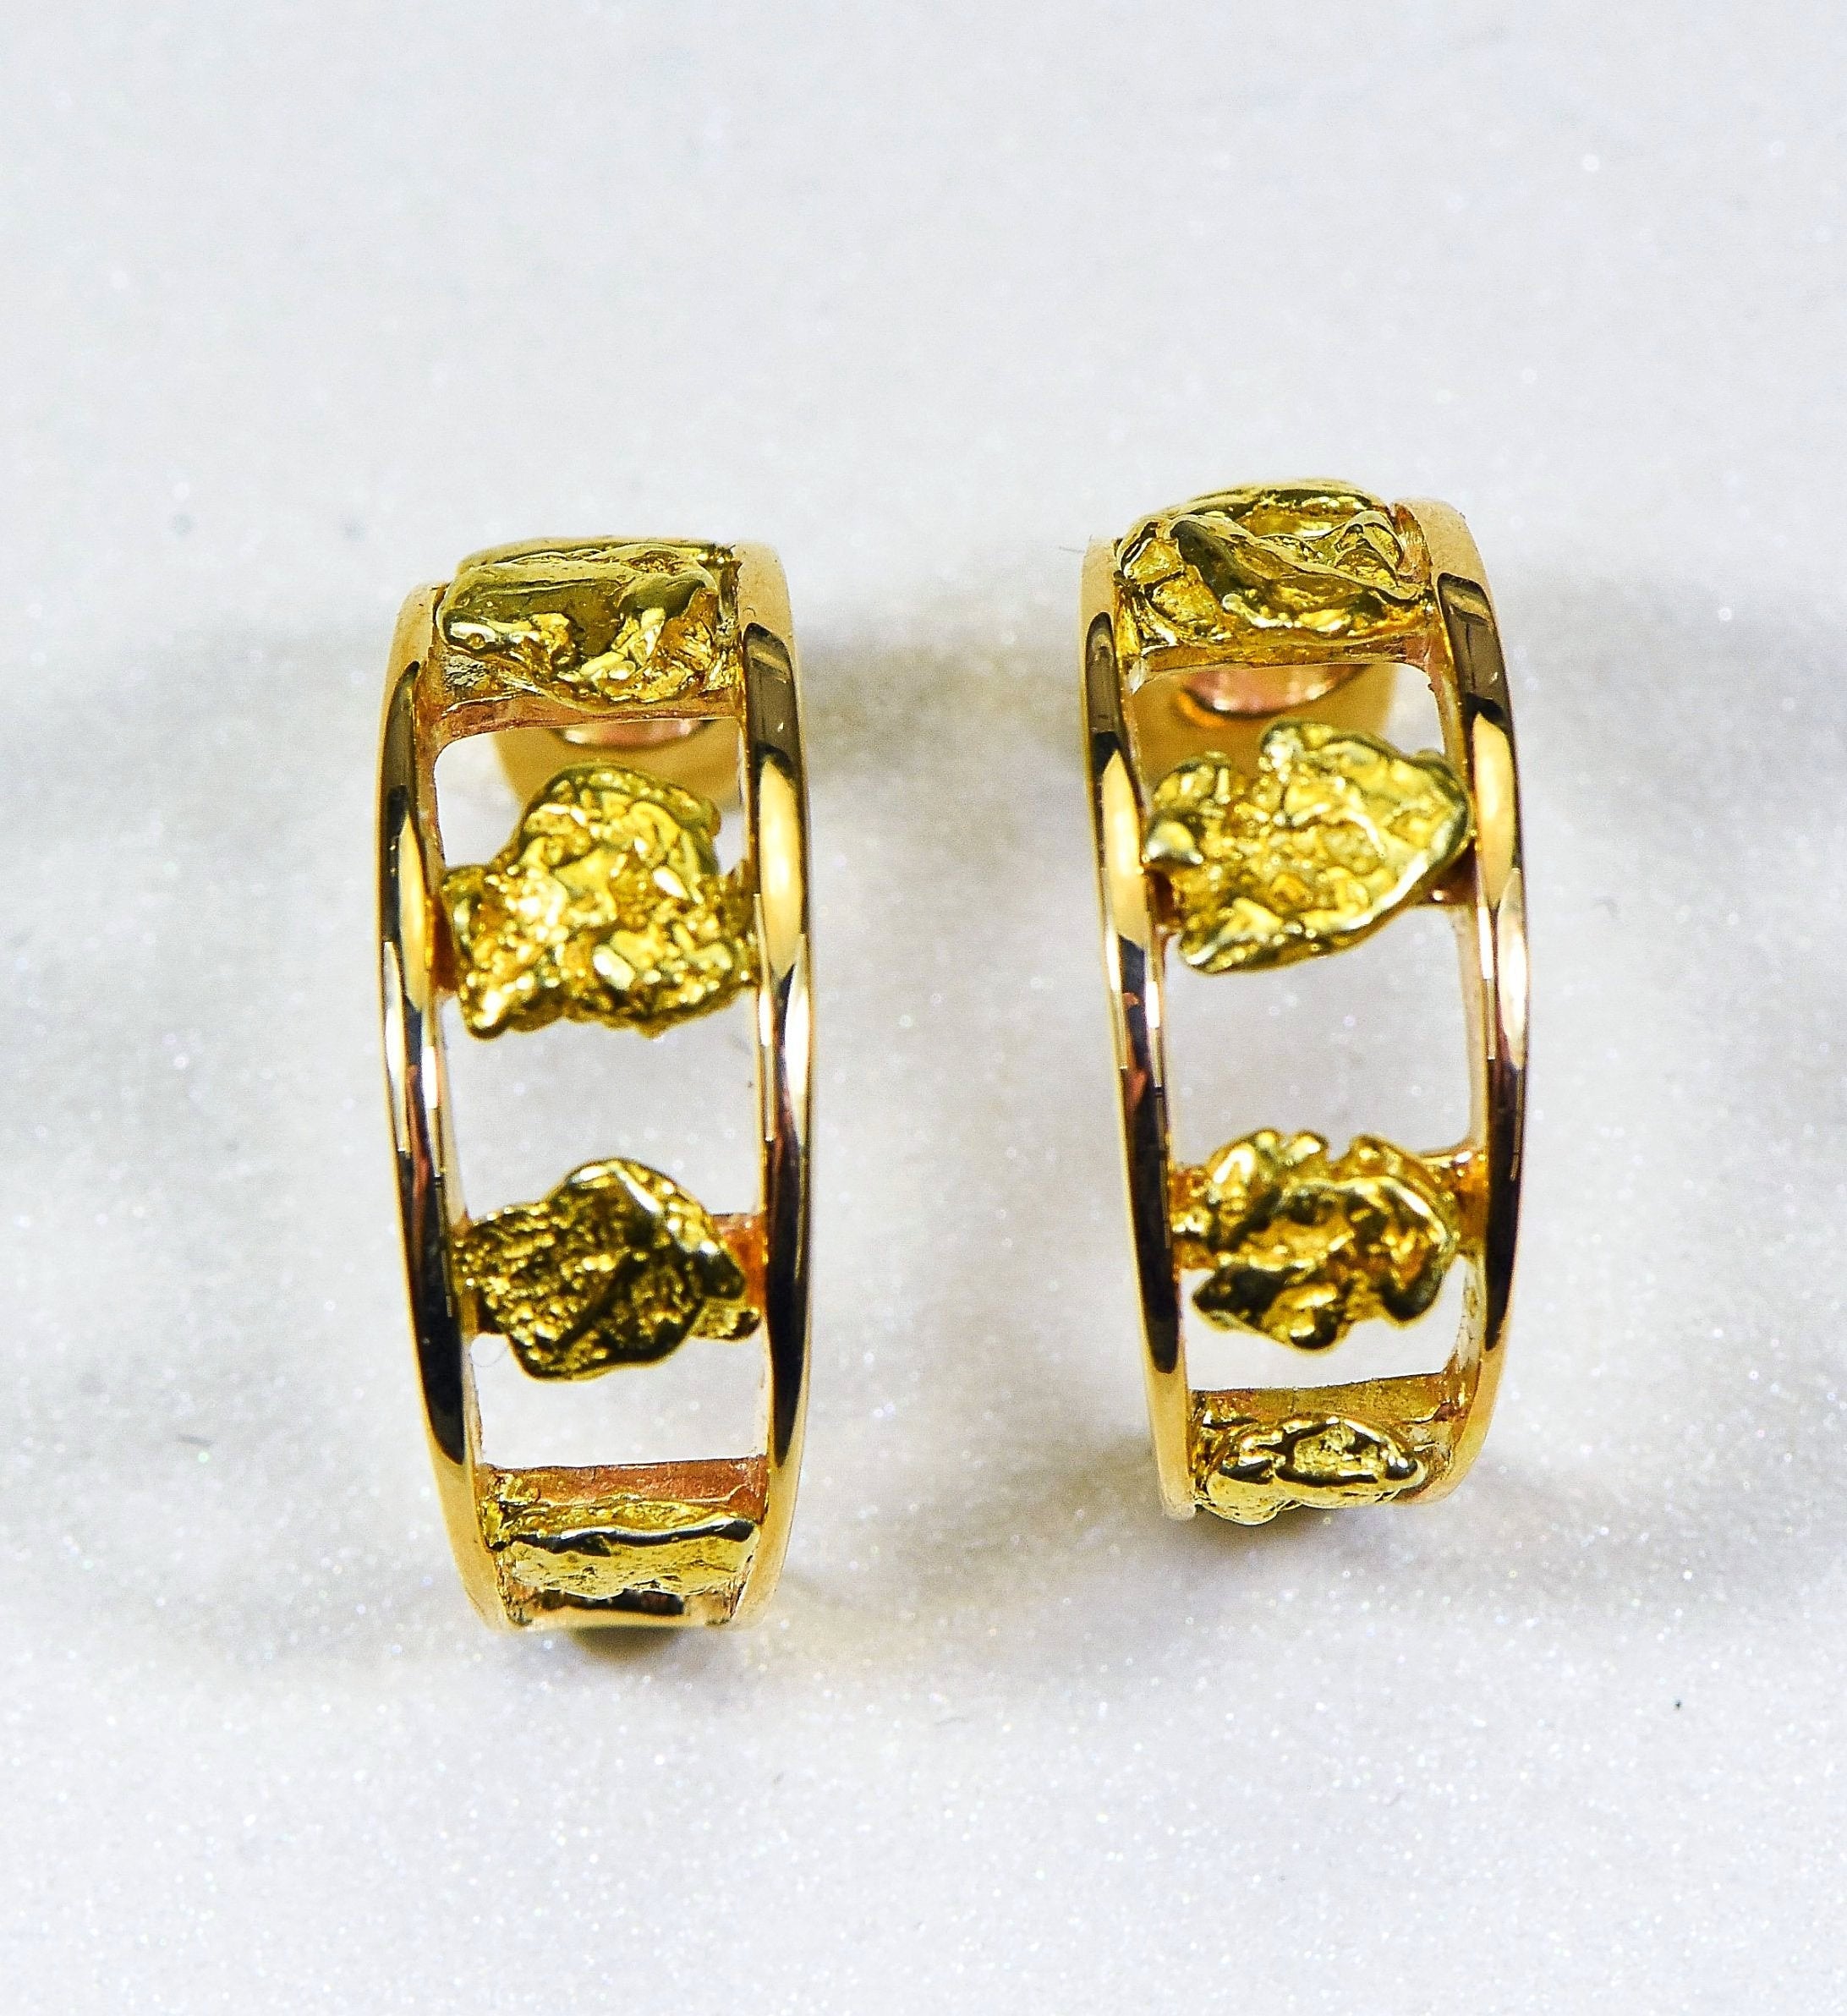 Gold Nugget Earrings "Orocal" EH20 Genuine Hand Crafted Jewelry - 14K Gold Casting